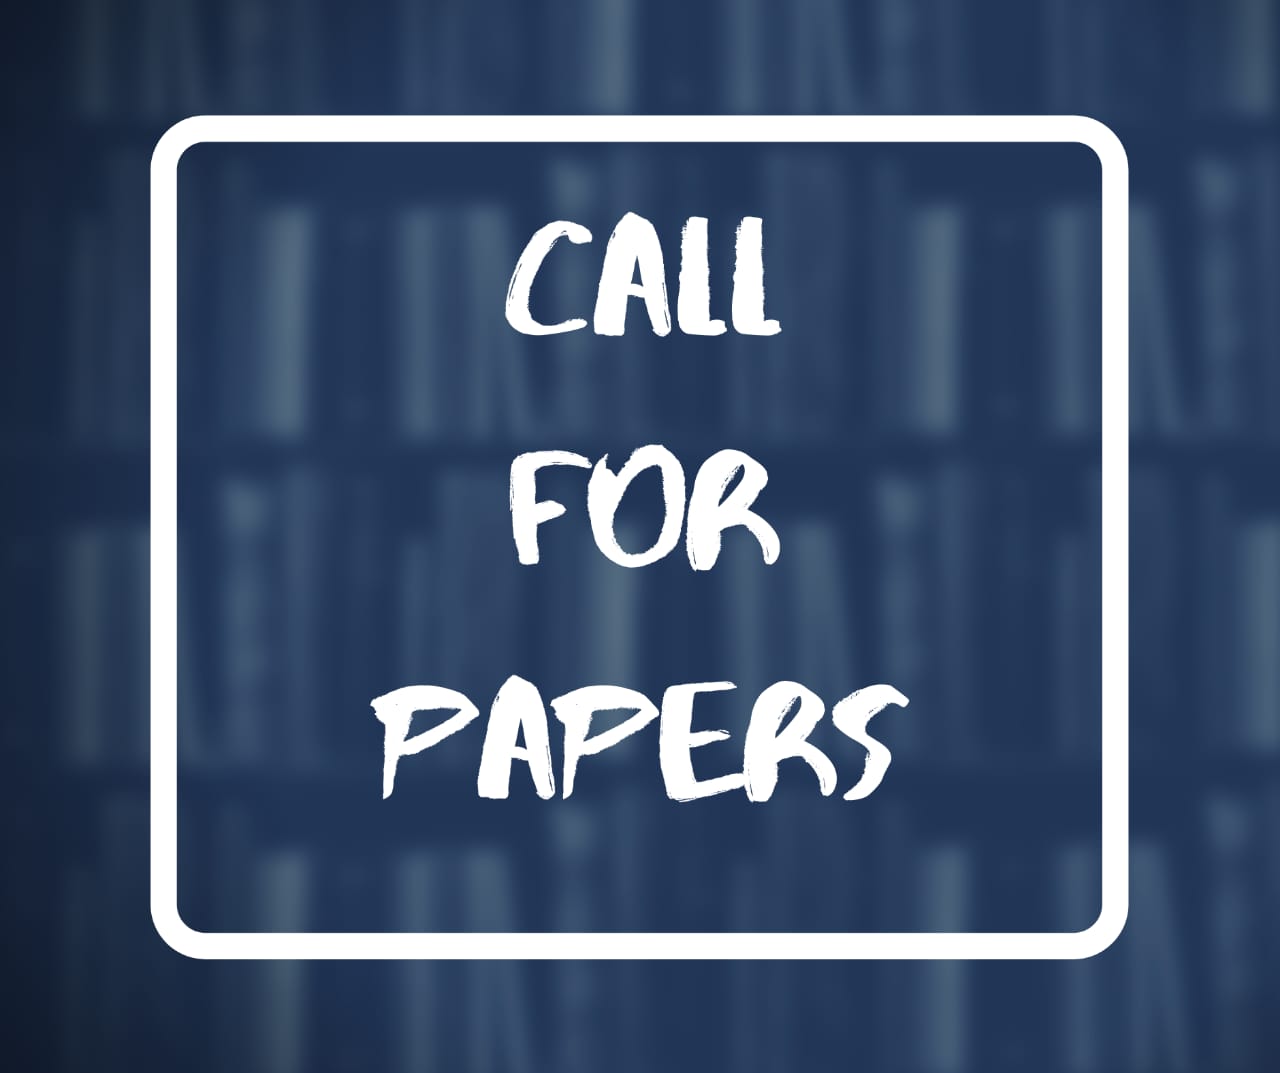 Call for Papers CNLU’s E-Journal of Academic Innovations and Research in Intellectual Property Assets (E-JAIRIPA) Vol 2, Issue 2 ; Submit by Feb 28